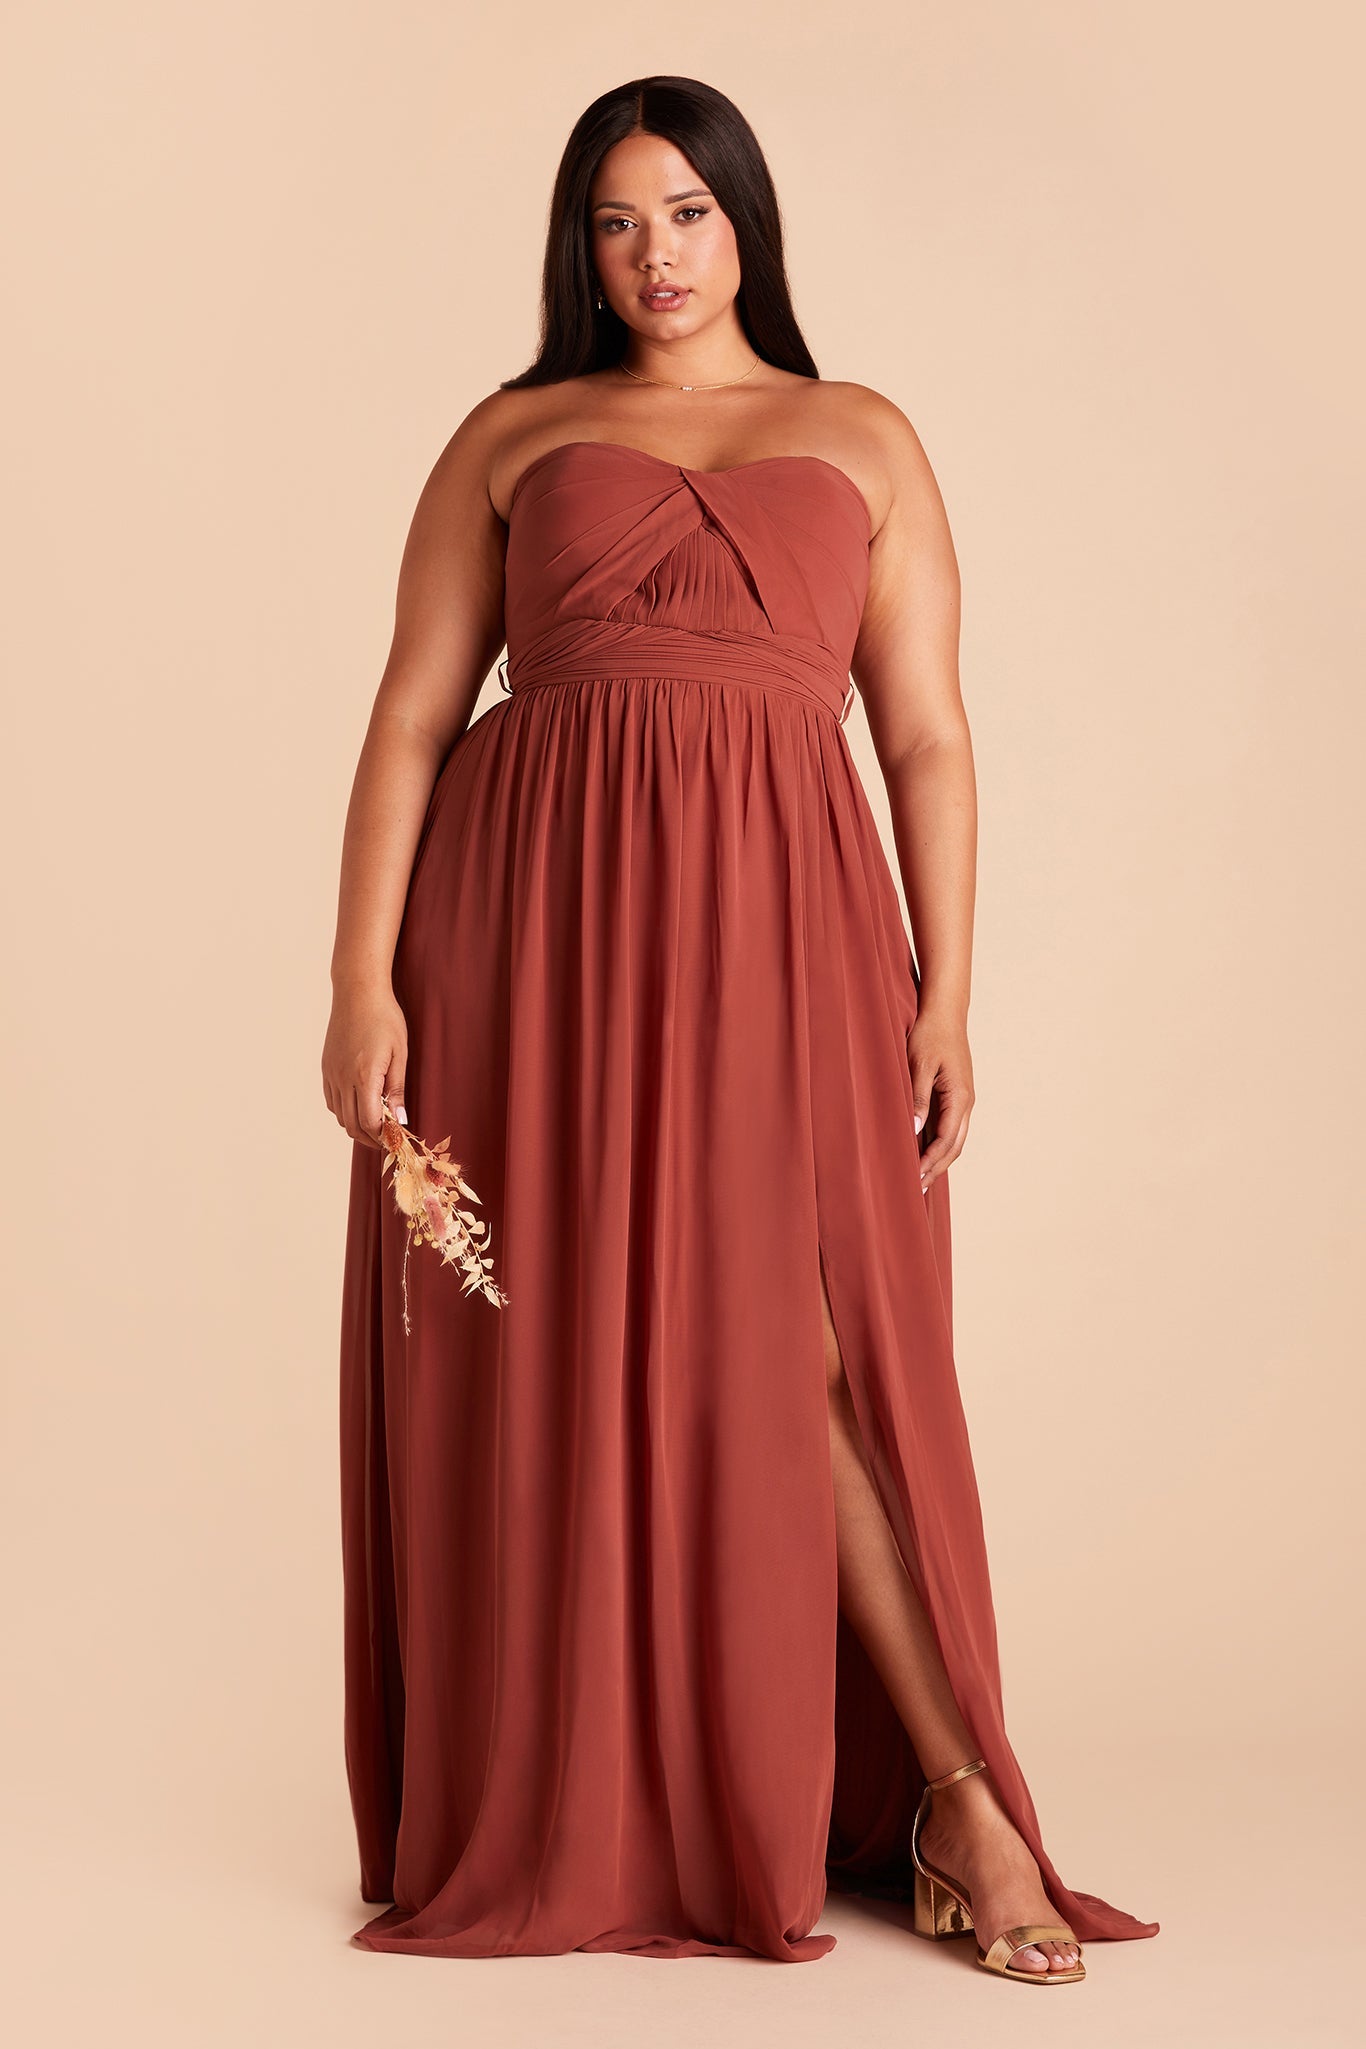 Grace convertible plus size bridesmaid dress with slit in spice chiffon by Birdy Grey, front view